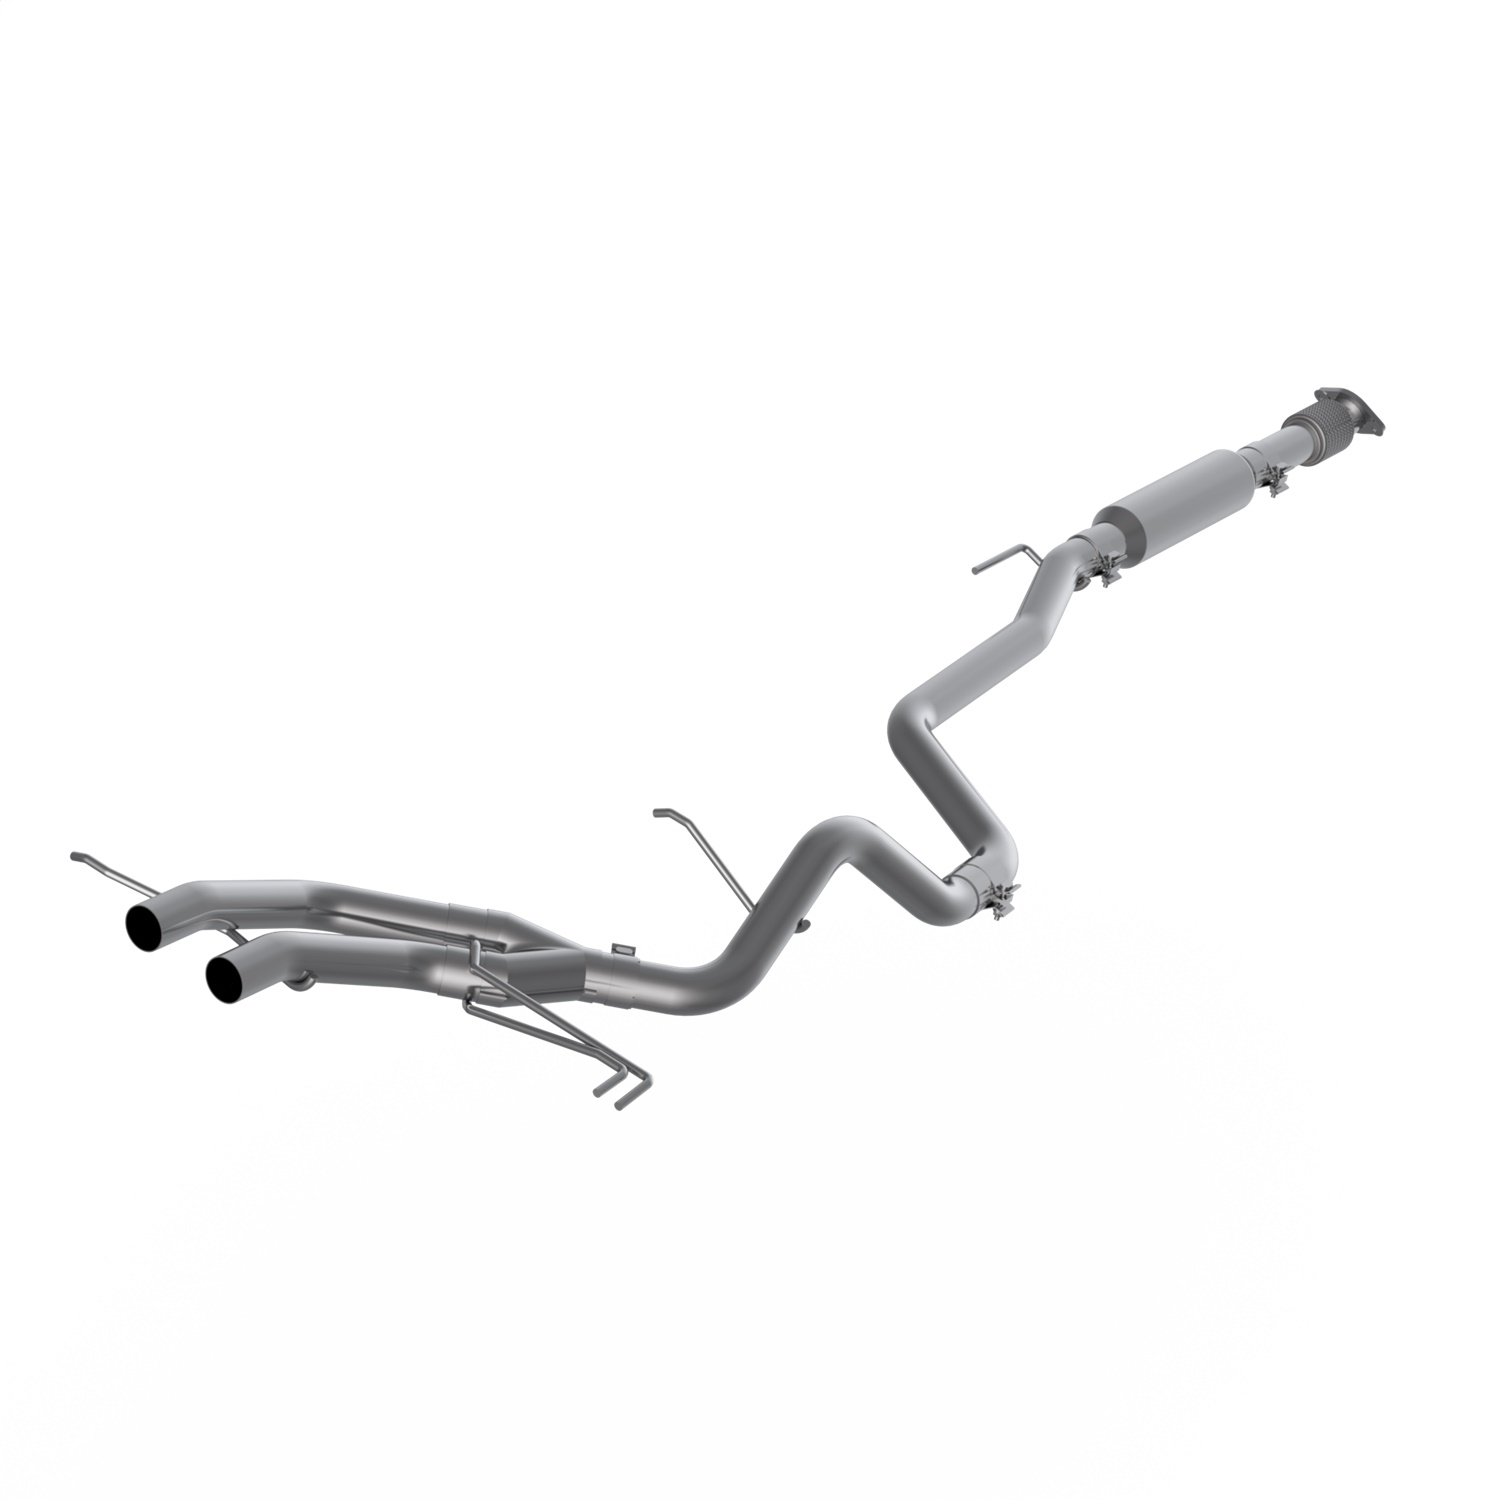 MBRP Exhaust S4702AL Armor Lite Cat Back Exhaust System Fits 13-17 Veloster